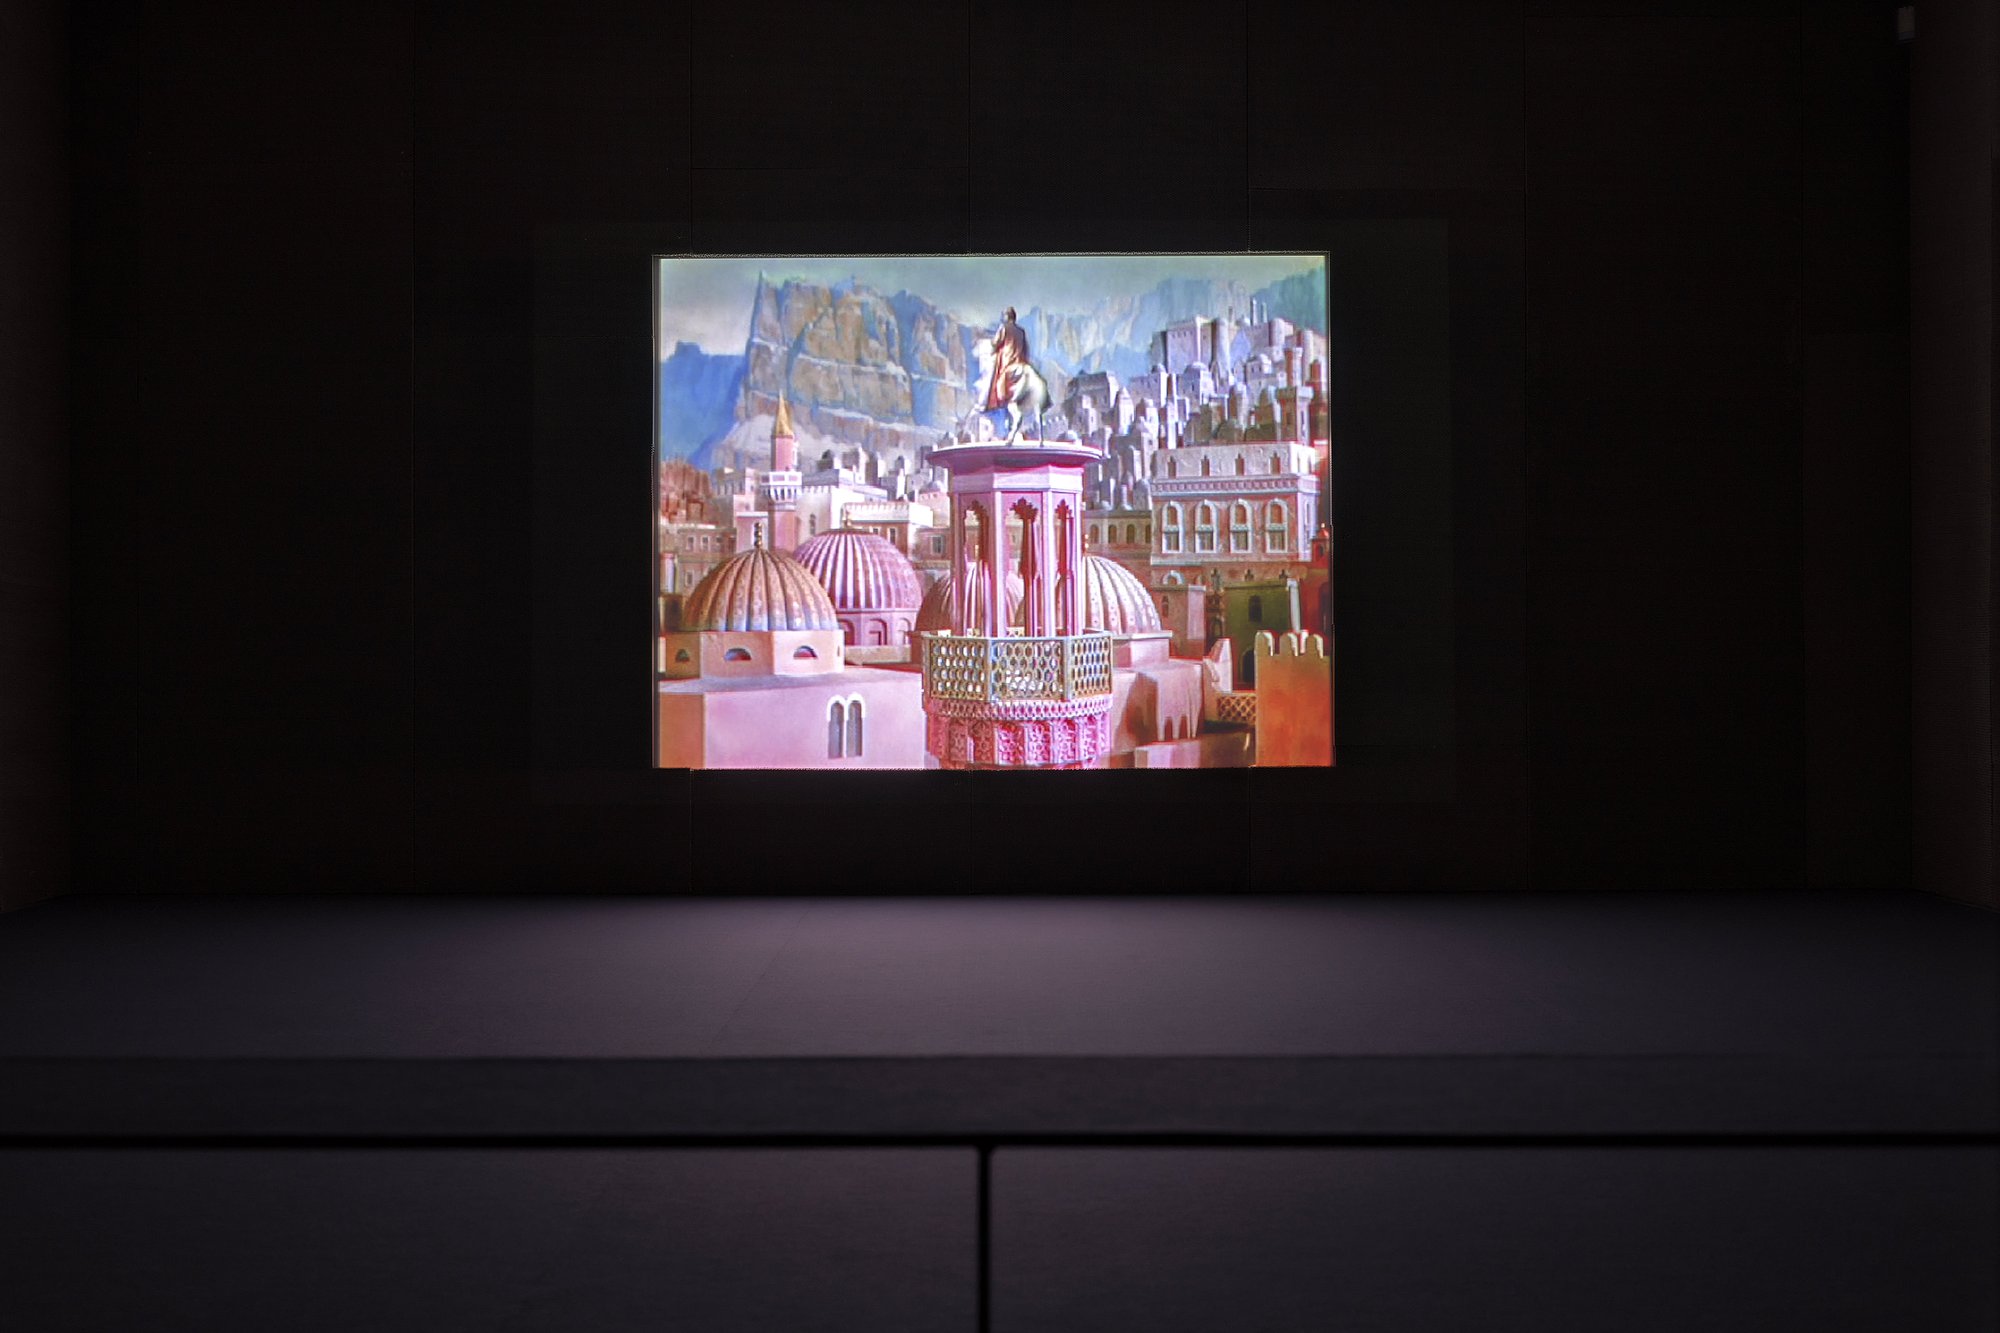 Iman Issa, Proposal for an Iraq War Memorial, 5 min. single-channel video, 2007. Installation view, Proxies, with a Life of Their Own, Taxispalais Kunsthalle Tirol, Innsbruck